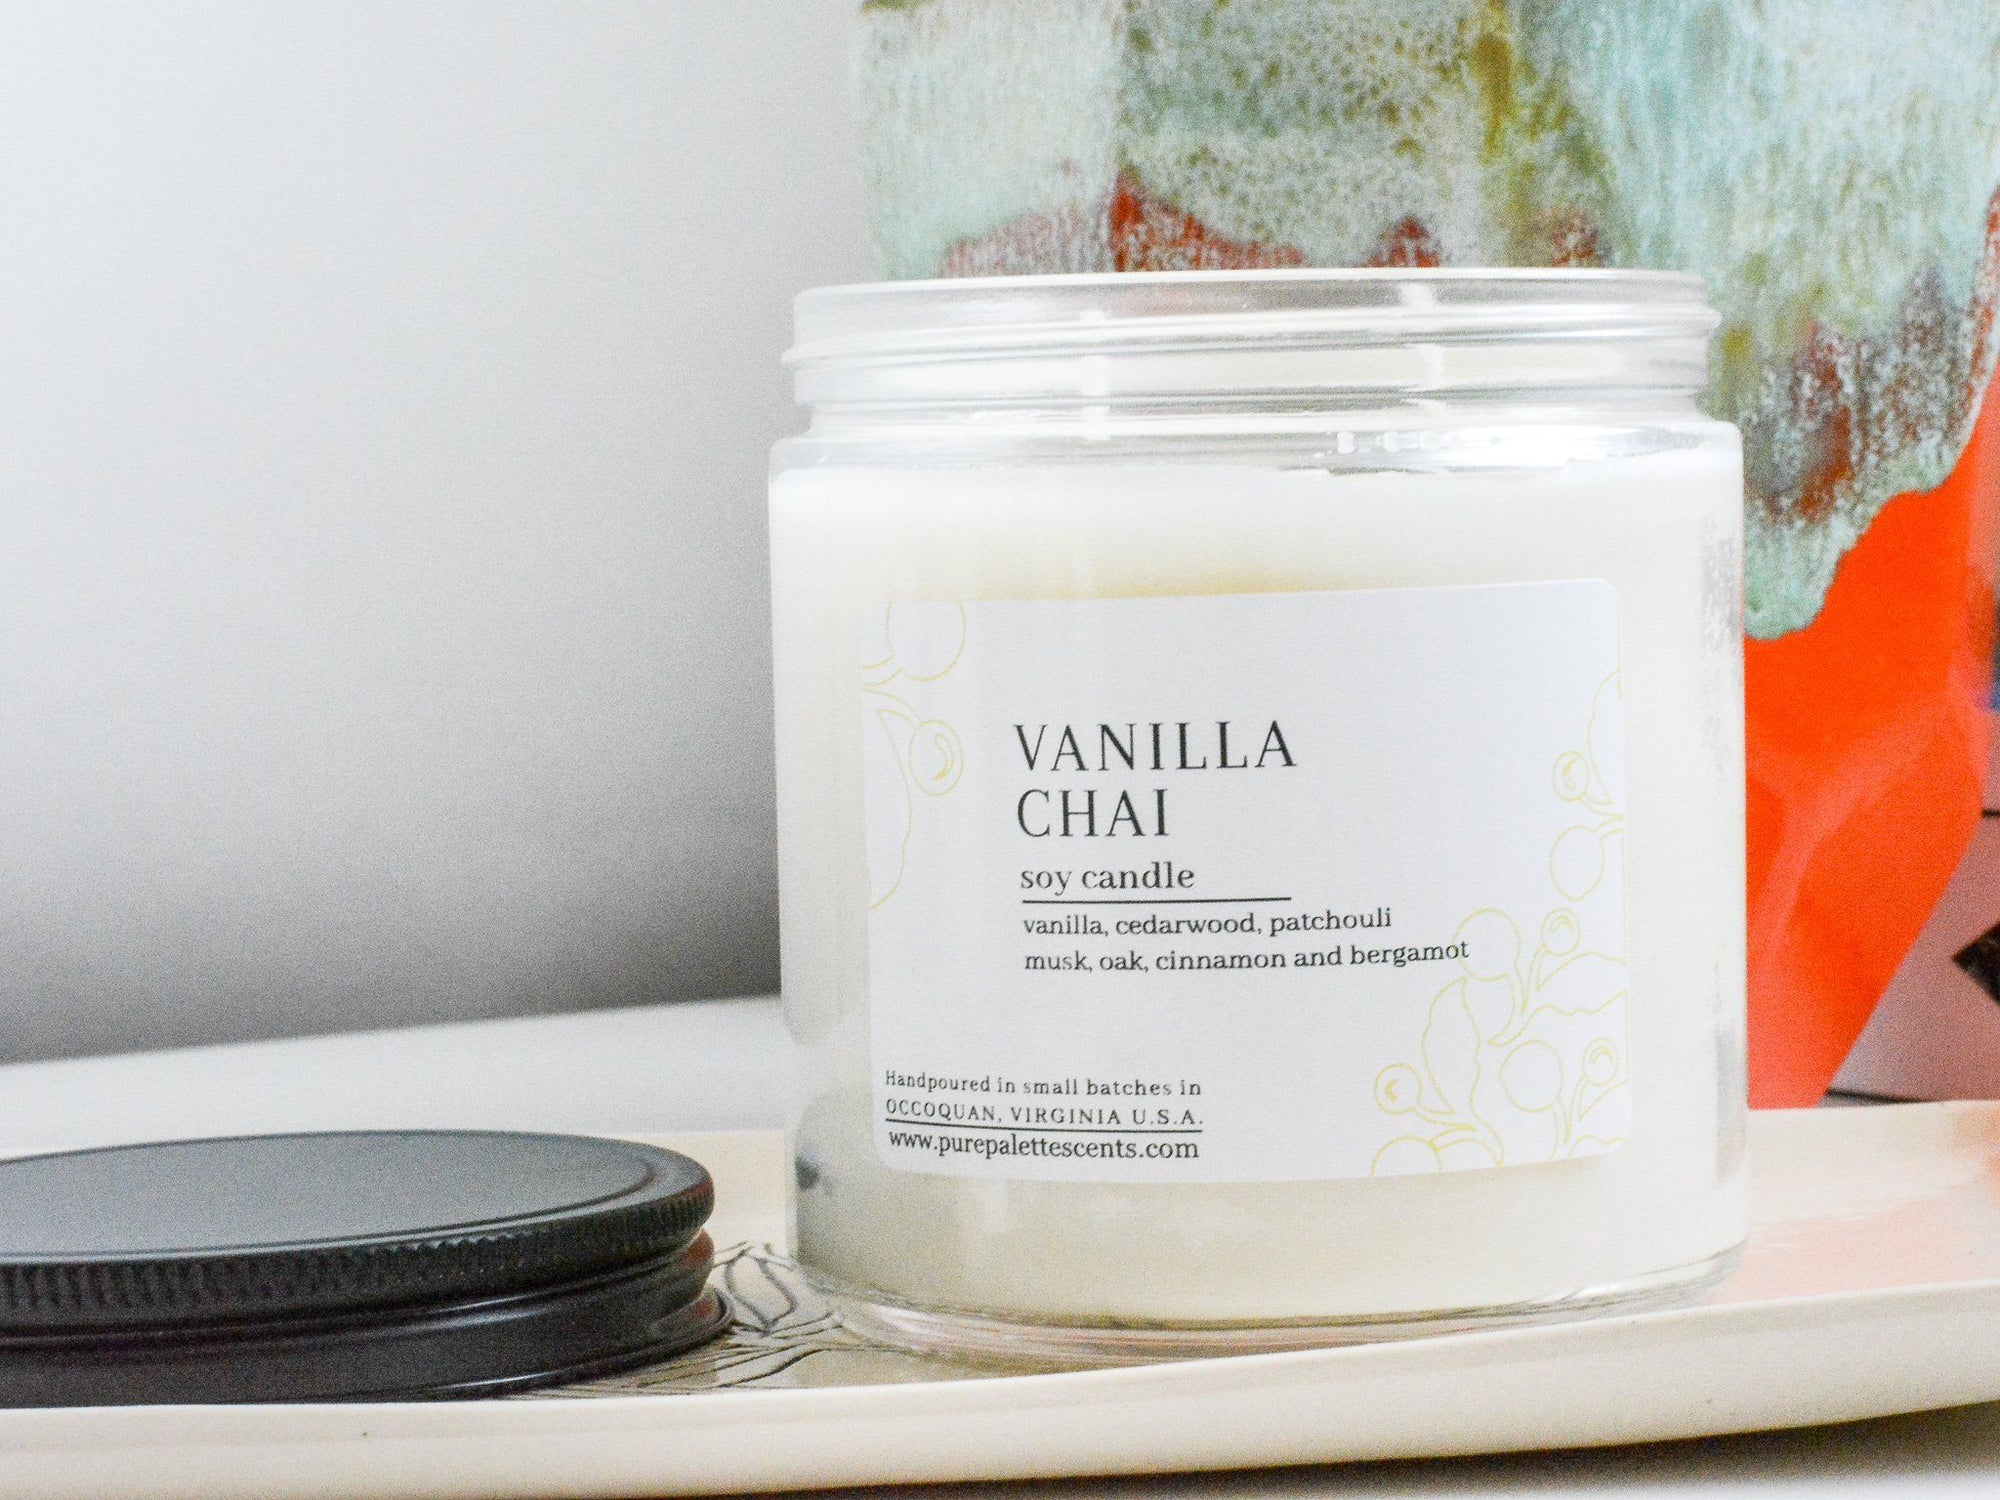 Mens Vanilla Candle | Luxury Candle Soy Wax Vanilla Blend | Unique Gift for Boyfriend, Dad, Husband | Gift Box Included